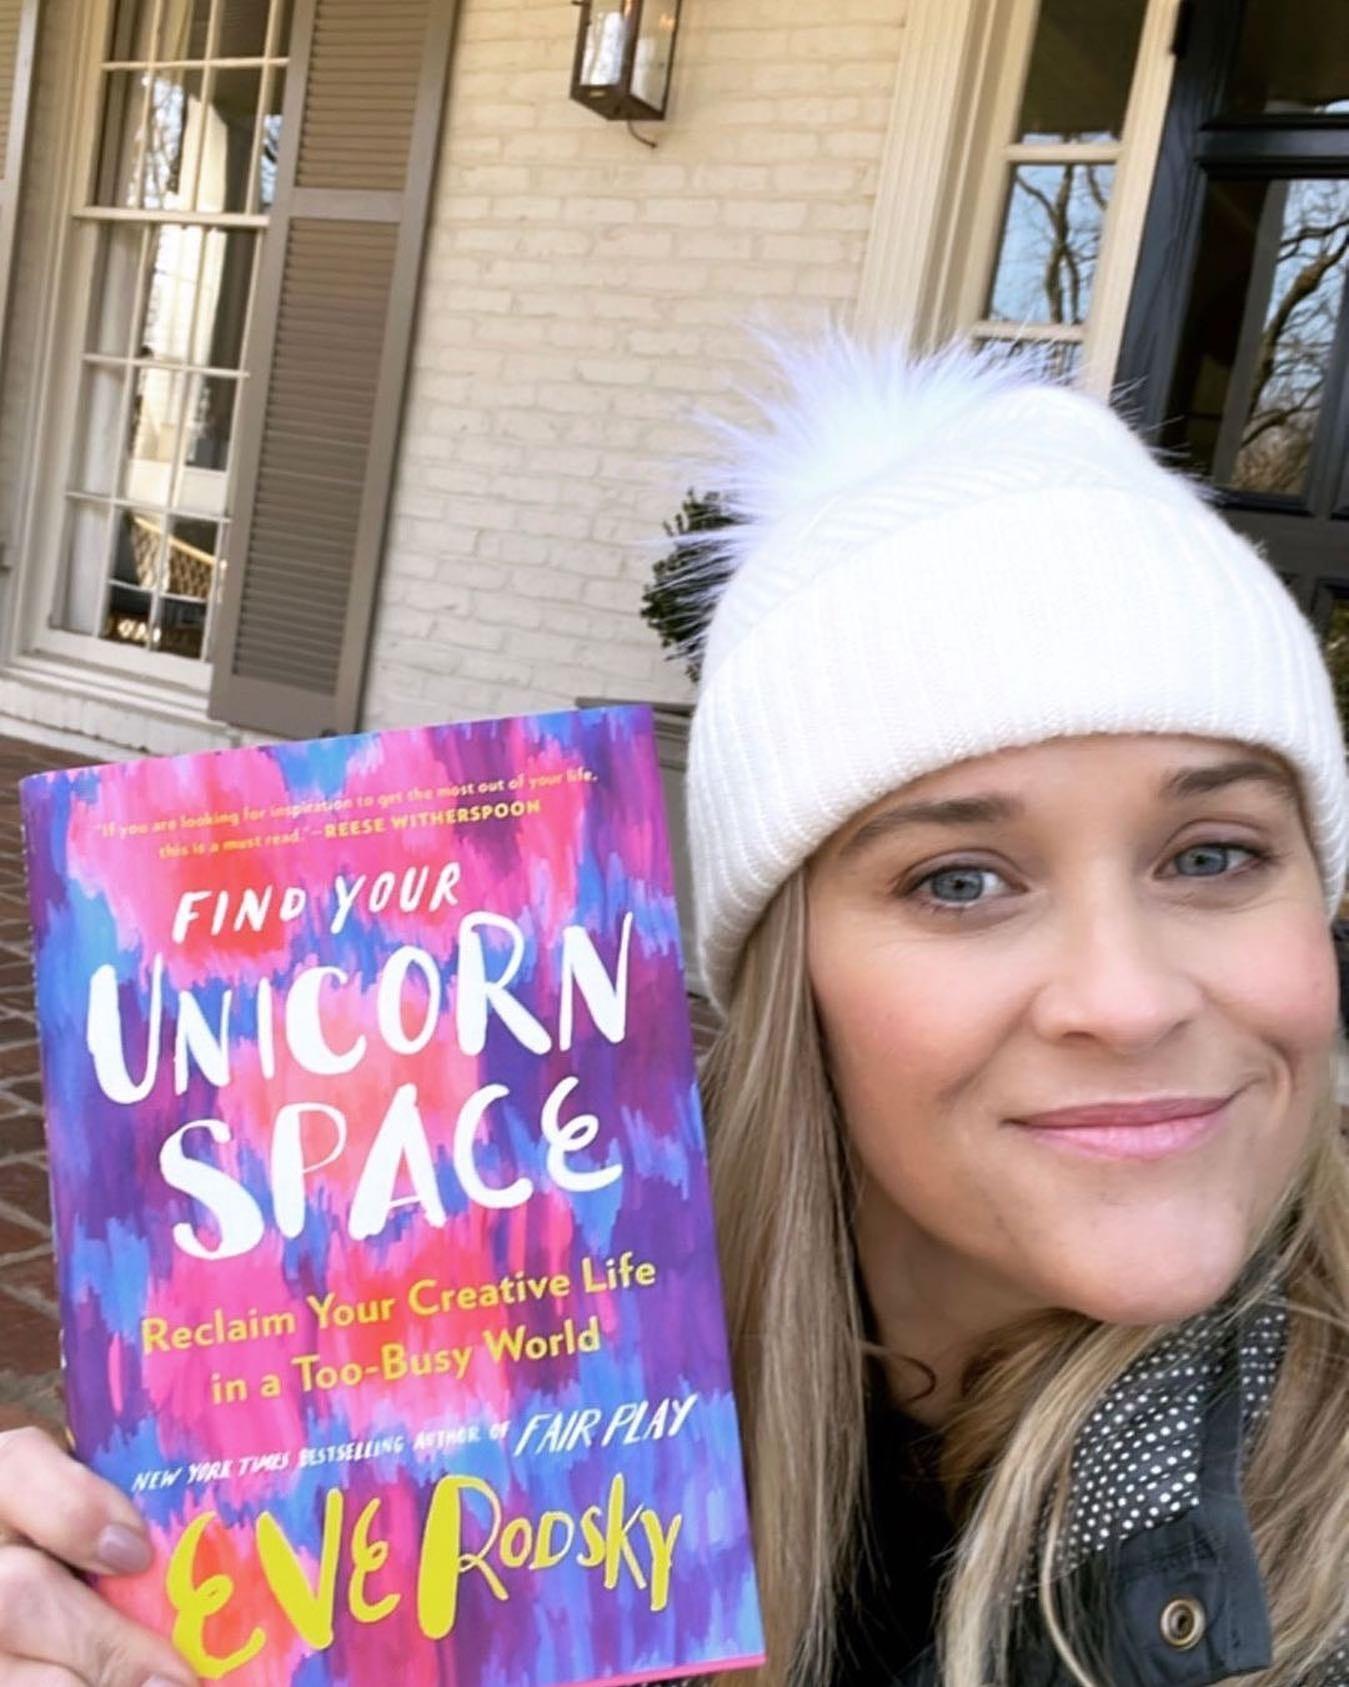 Britney Spears Praises Reese Witherspoon’s Book Recommendation: ‘Find Your Unicorn Space’ 